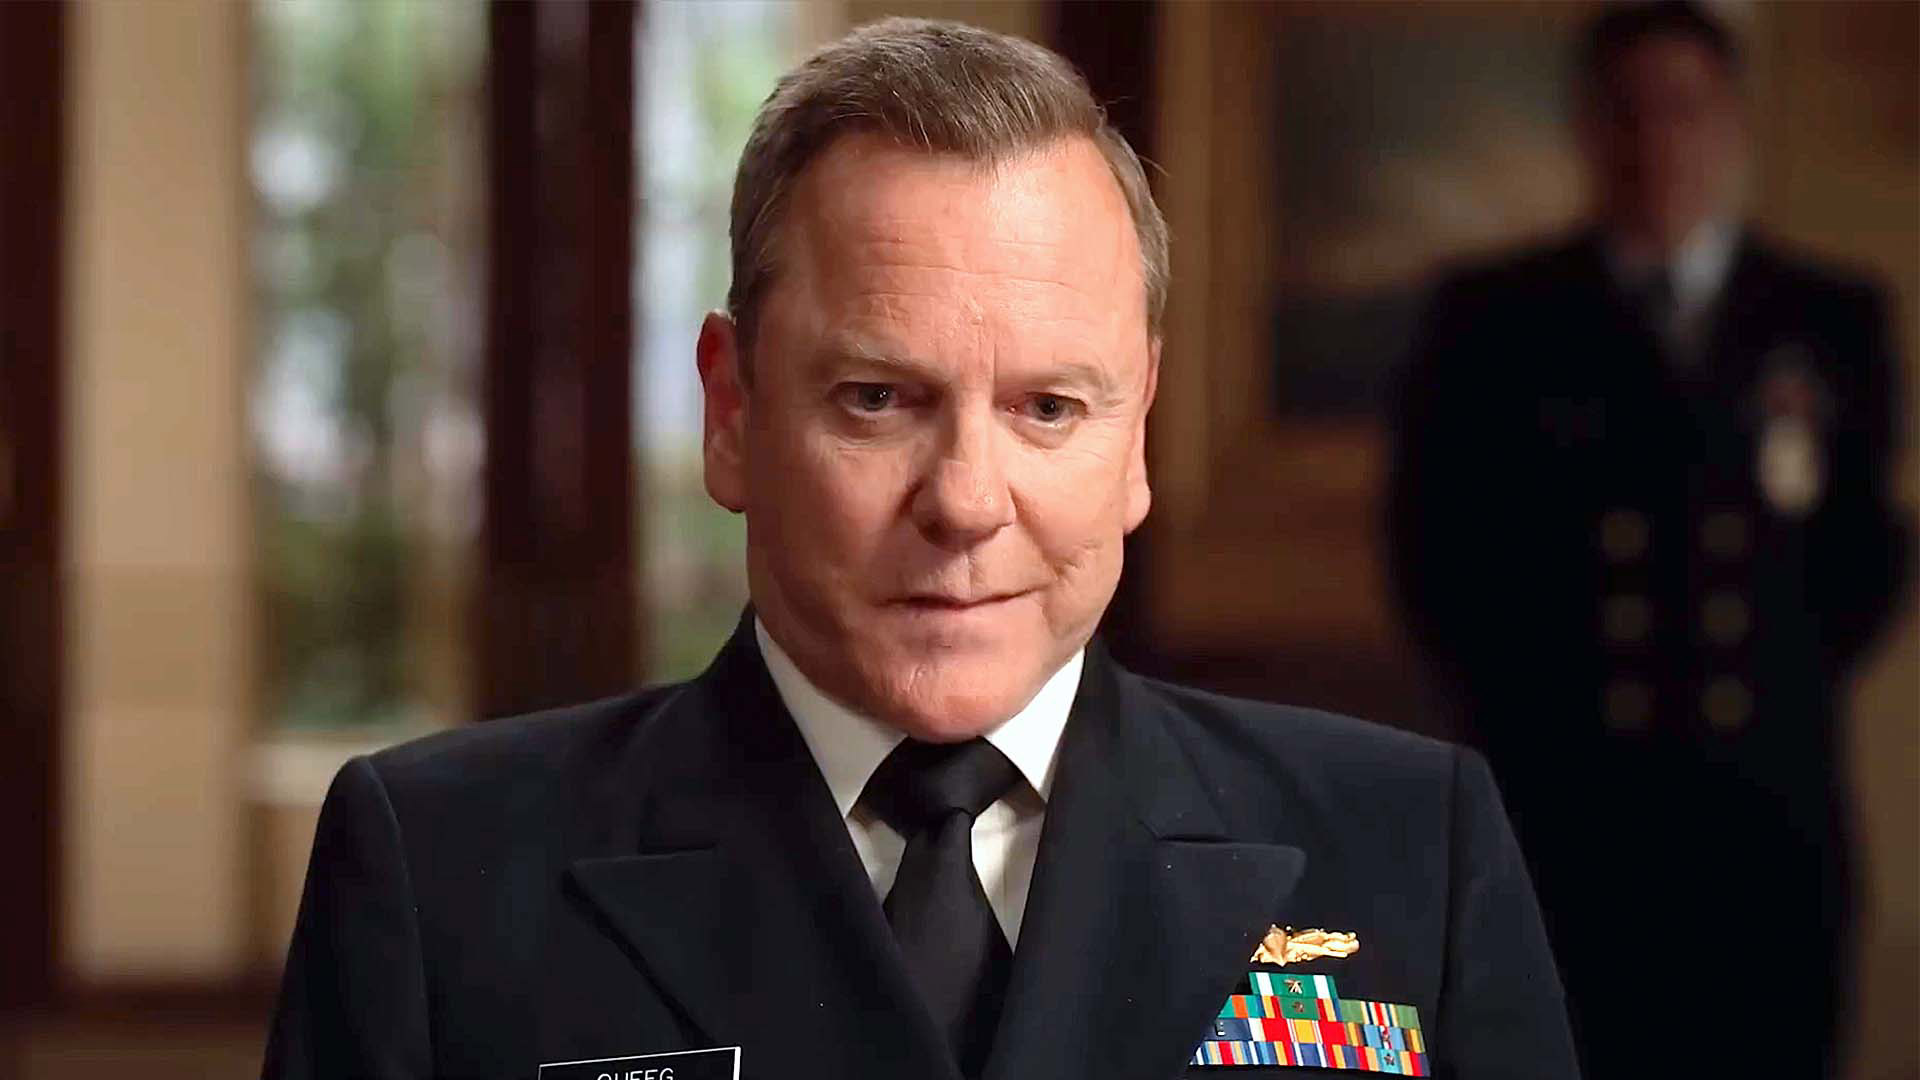 Official Trailer for The Caine Mutiny CourtMartial